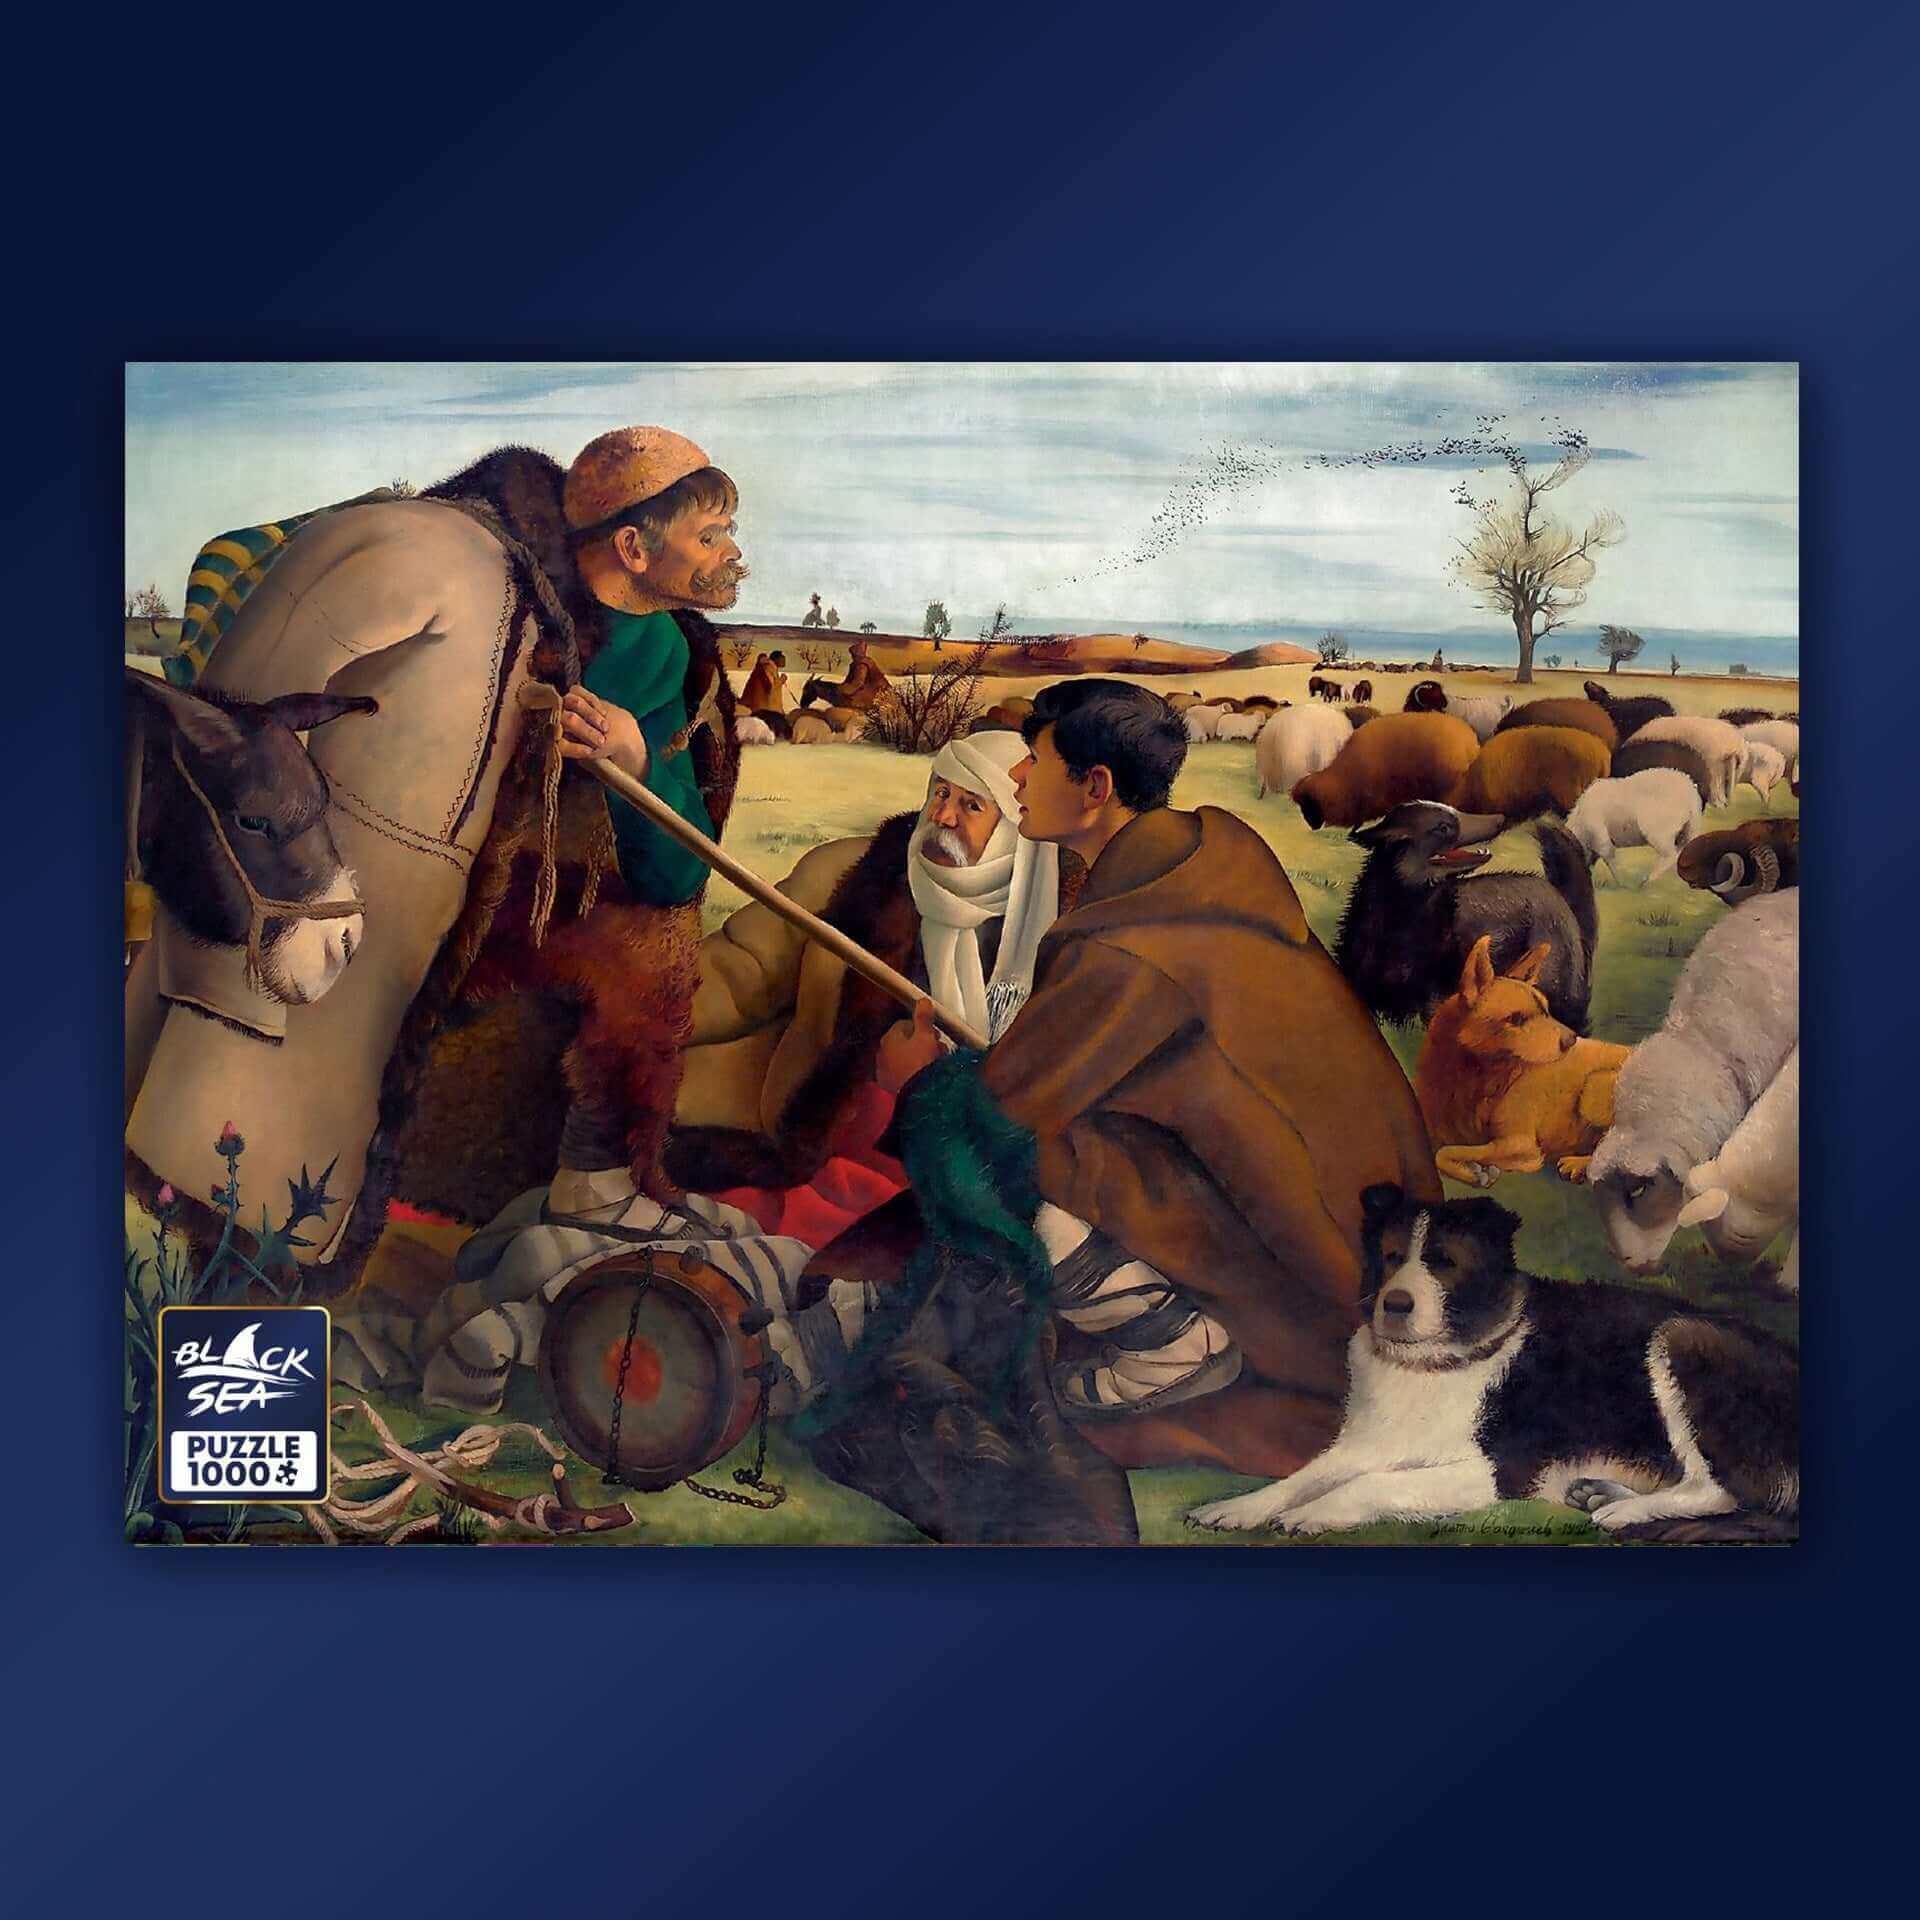 Puzzle Black Sea Premium 1000 pieces - Brezovo Shepherds, The emblematic painting Brezovo Shepherds dates from the first period of renowned Bulgarian painter Zlatyu Boyadzhiev; it is characterized by taut lines and a deep insight into the psyche of the de